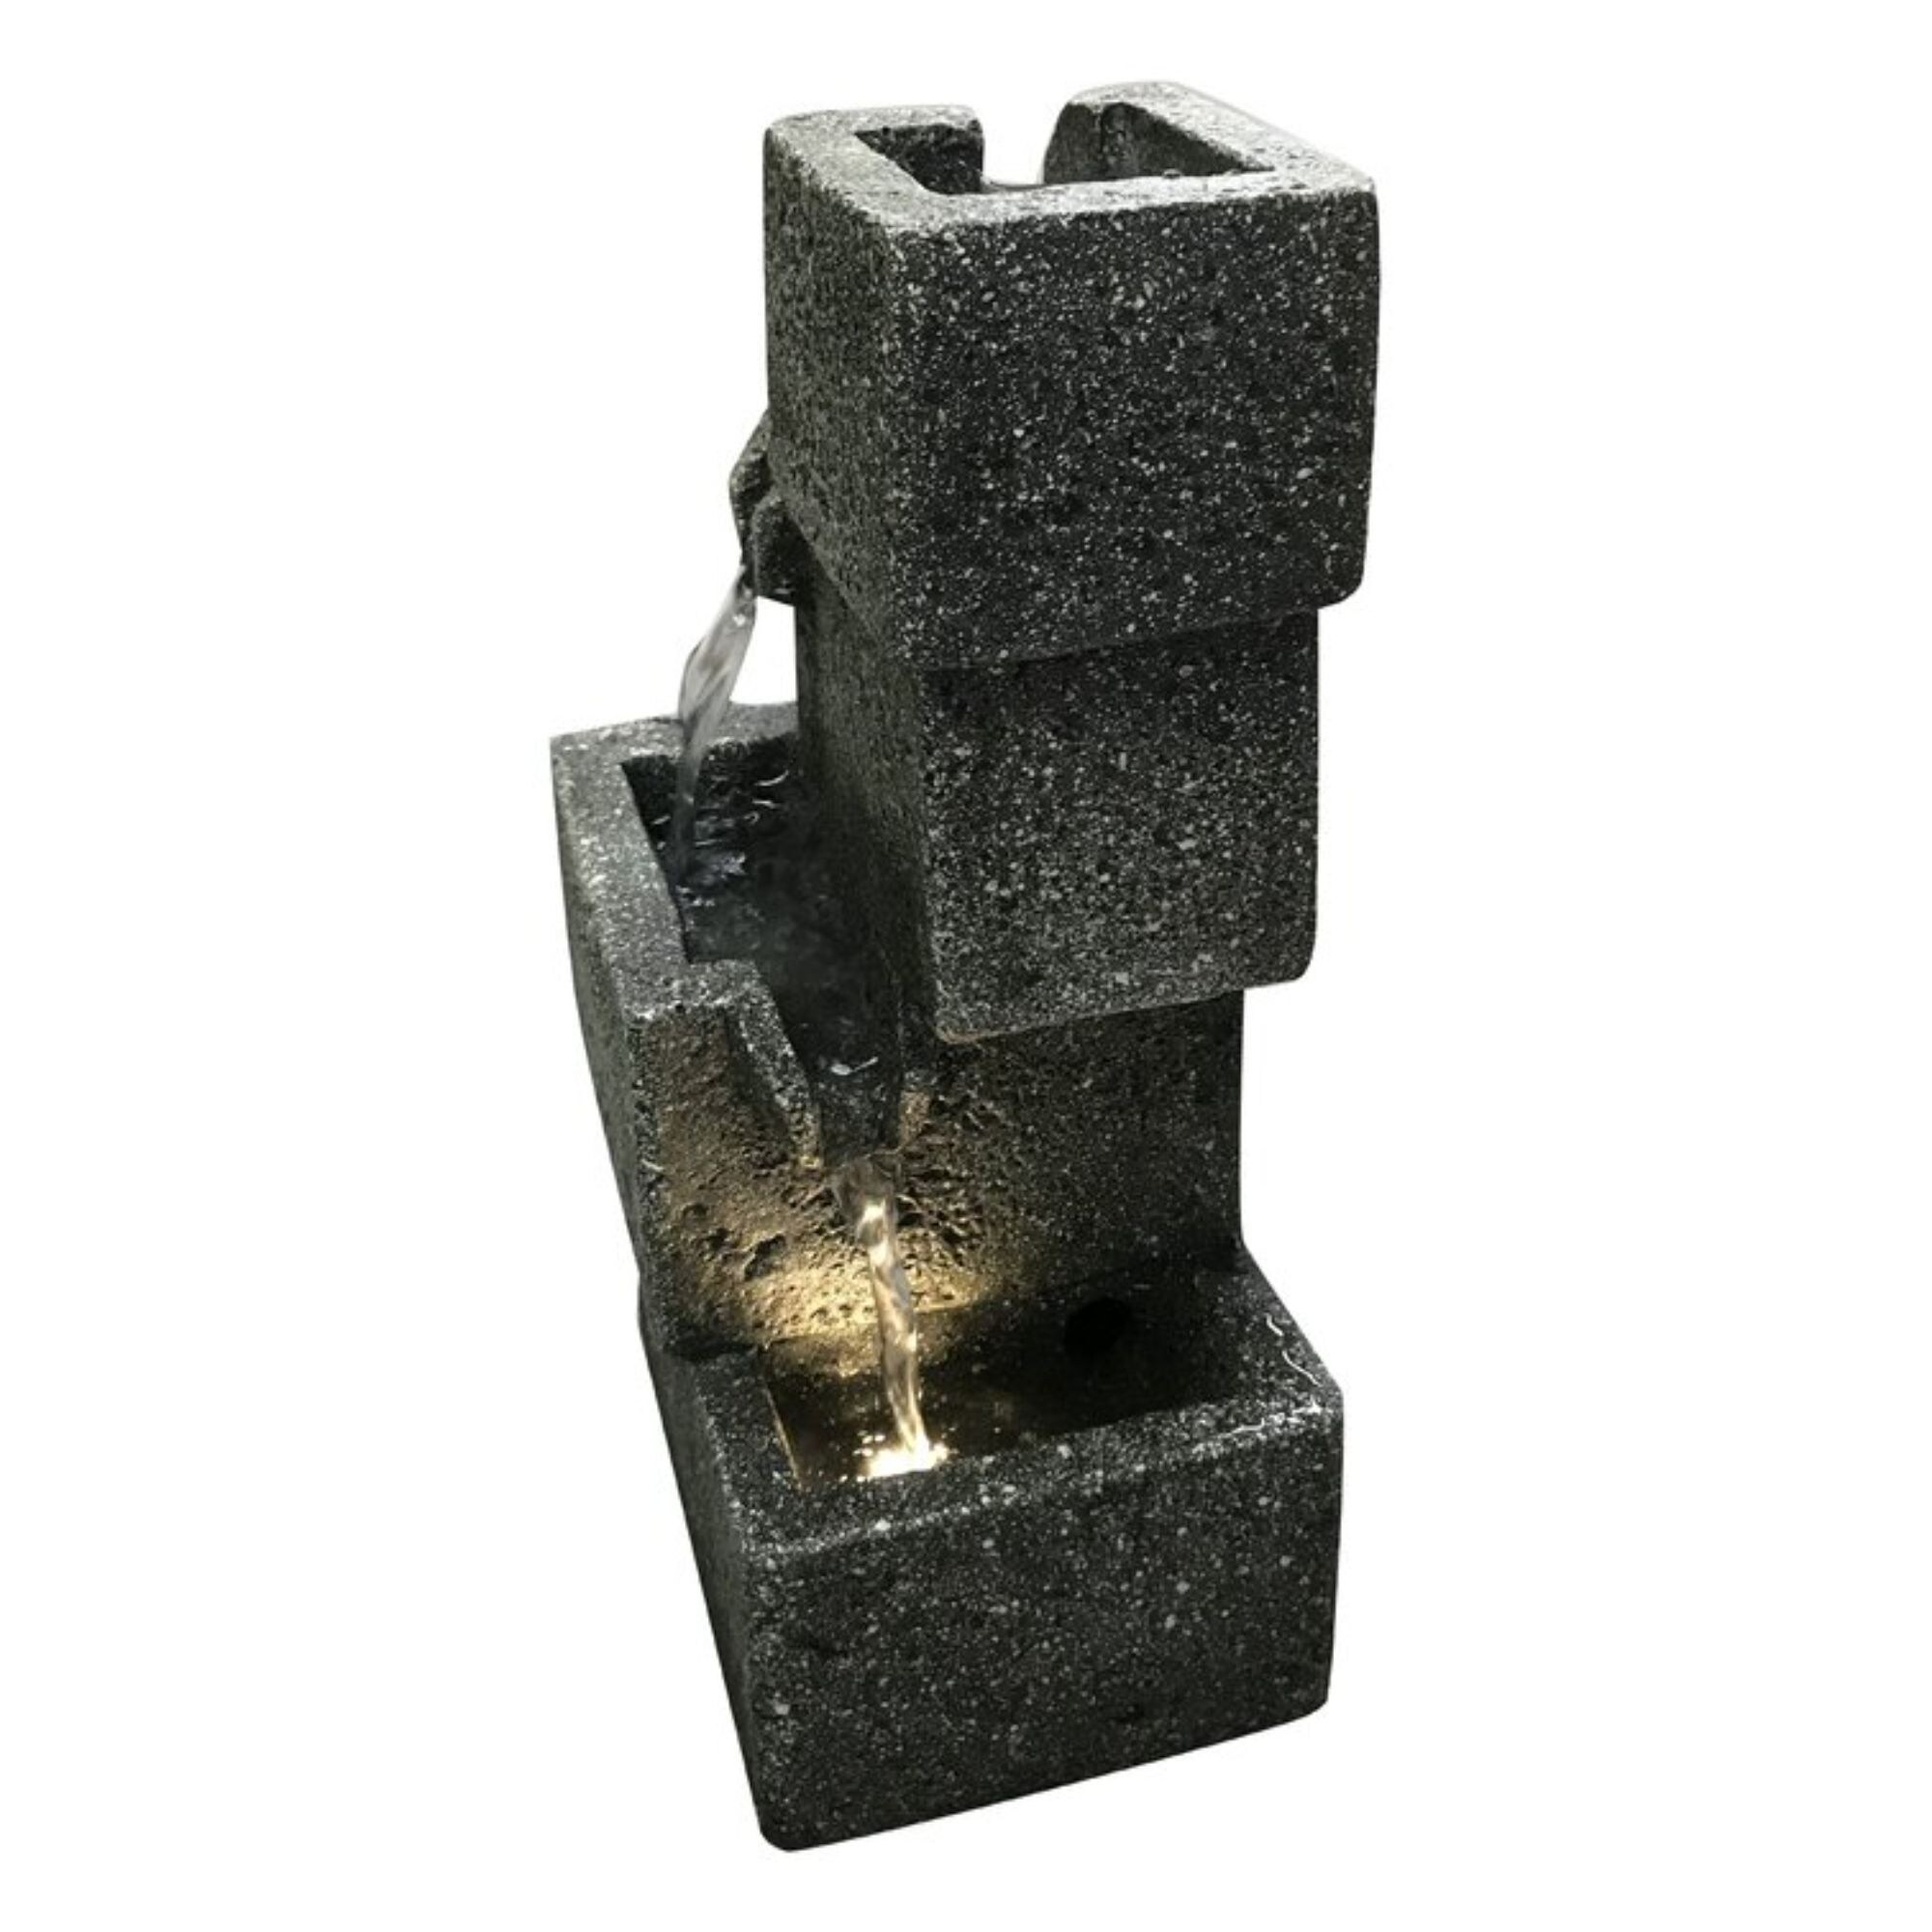 11" LED Lighted Concrete Crates Water Tabletop Fountain